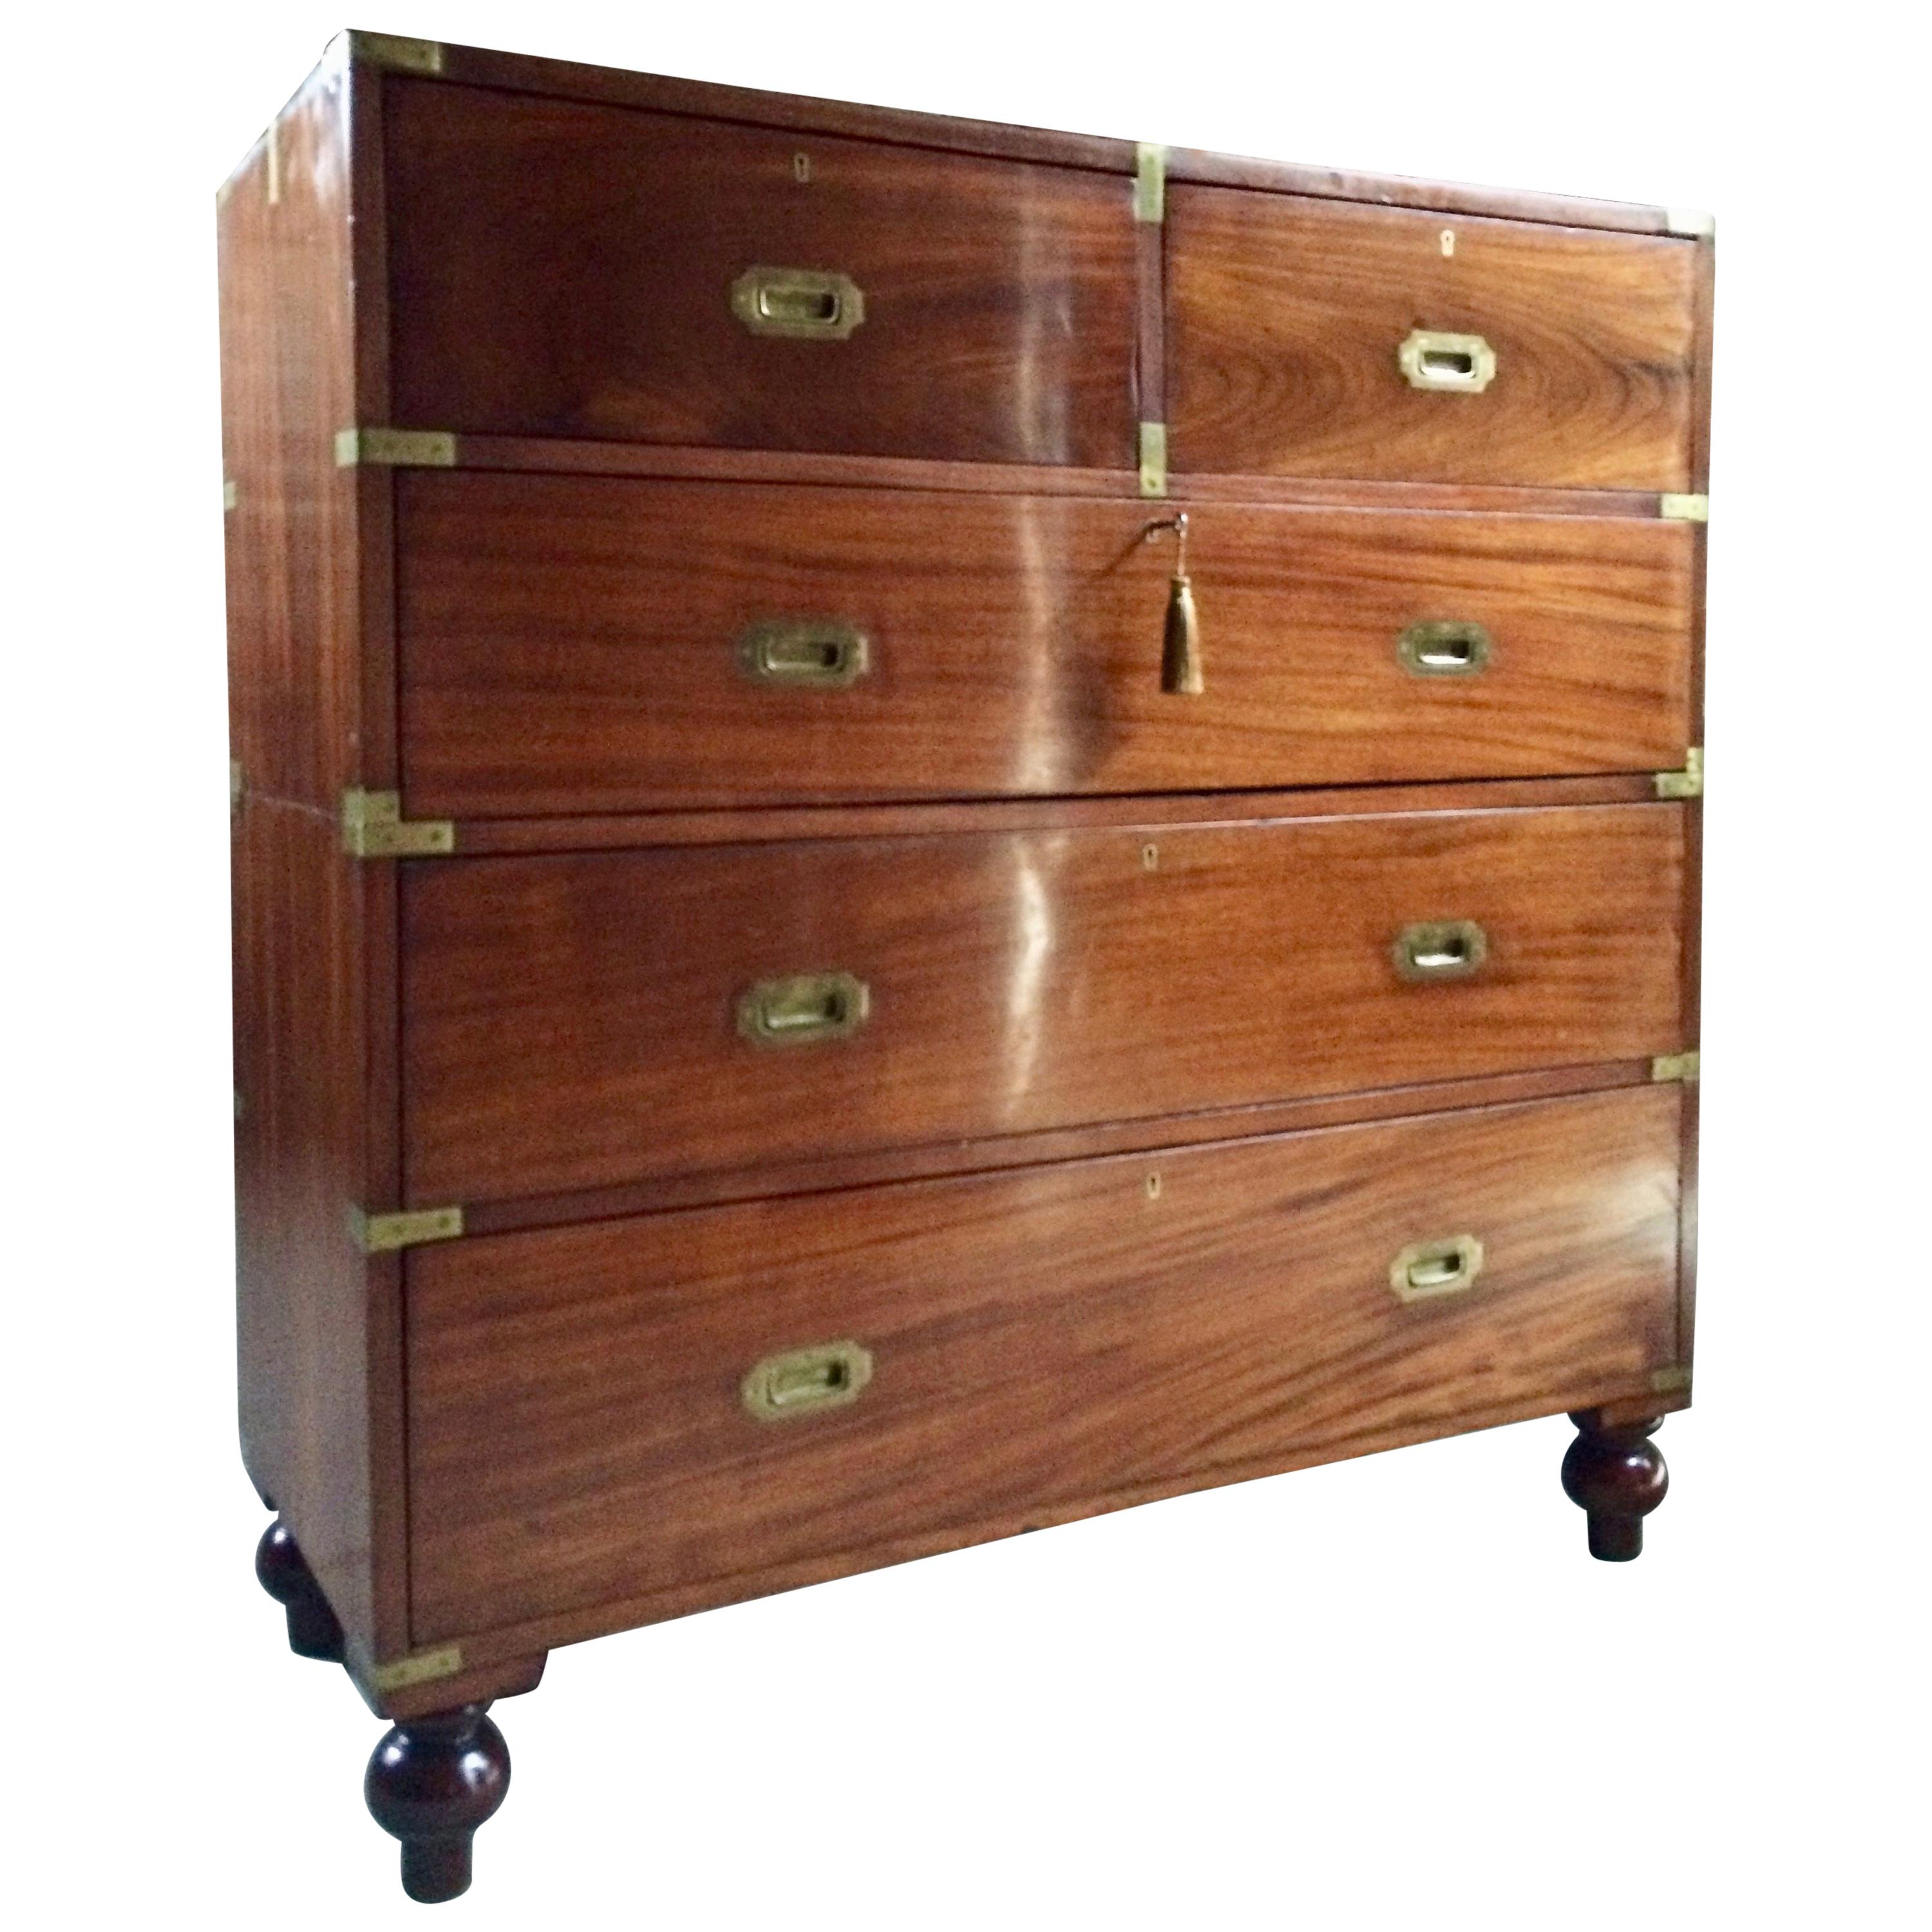 Antique Campaign Chest of Drawers Dresser Mahogany Tall Military Victorian No.3